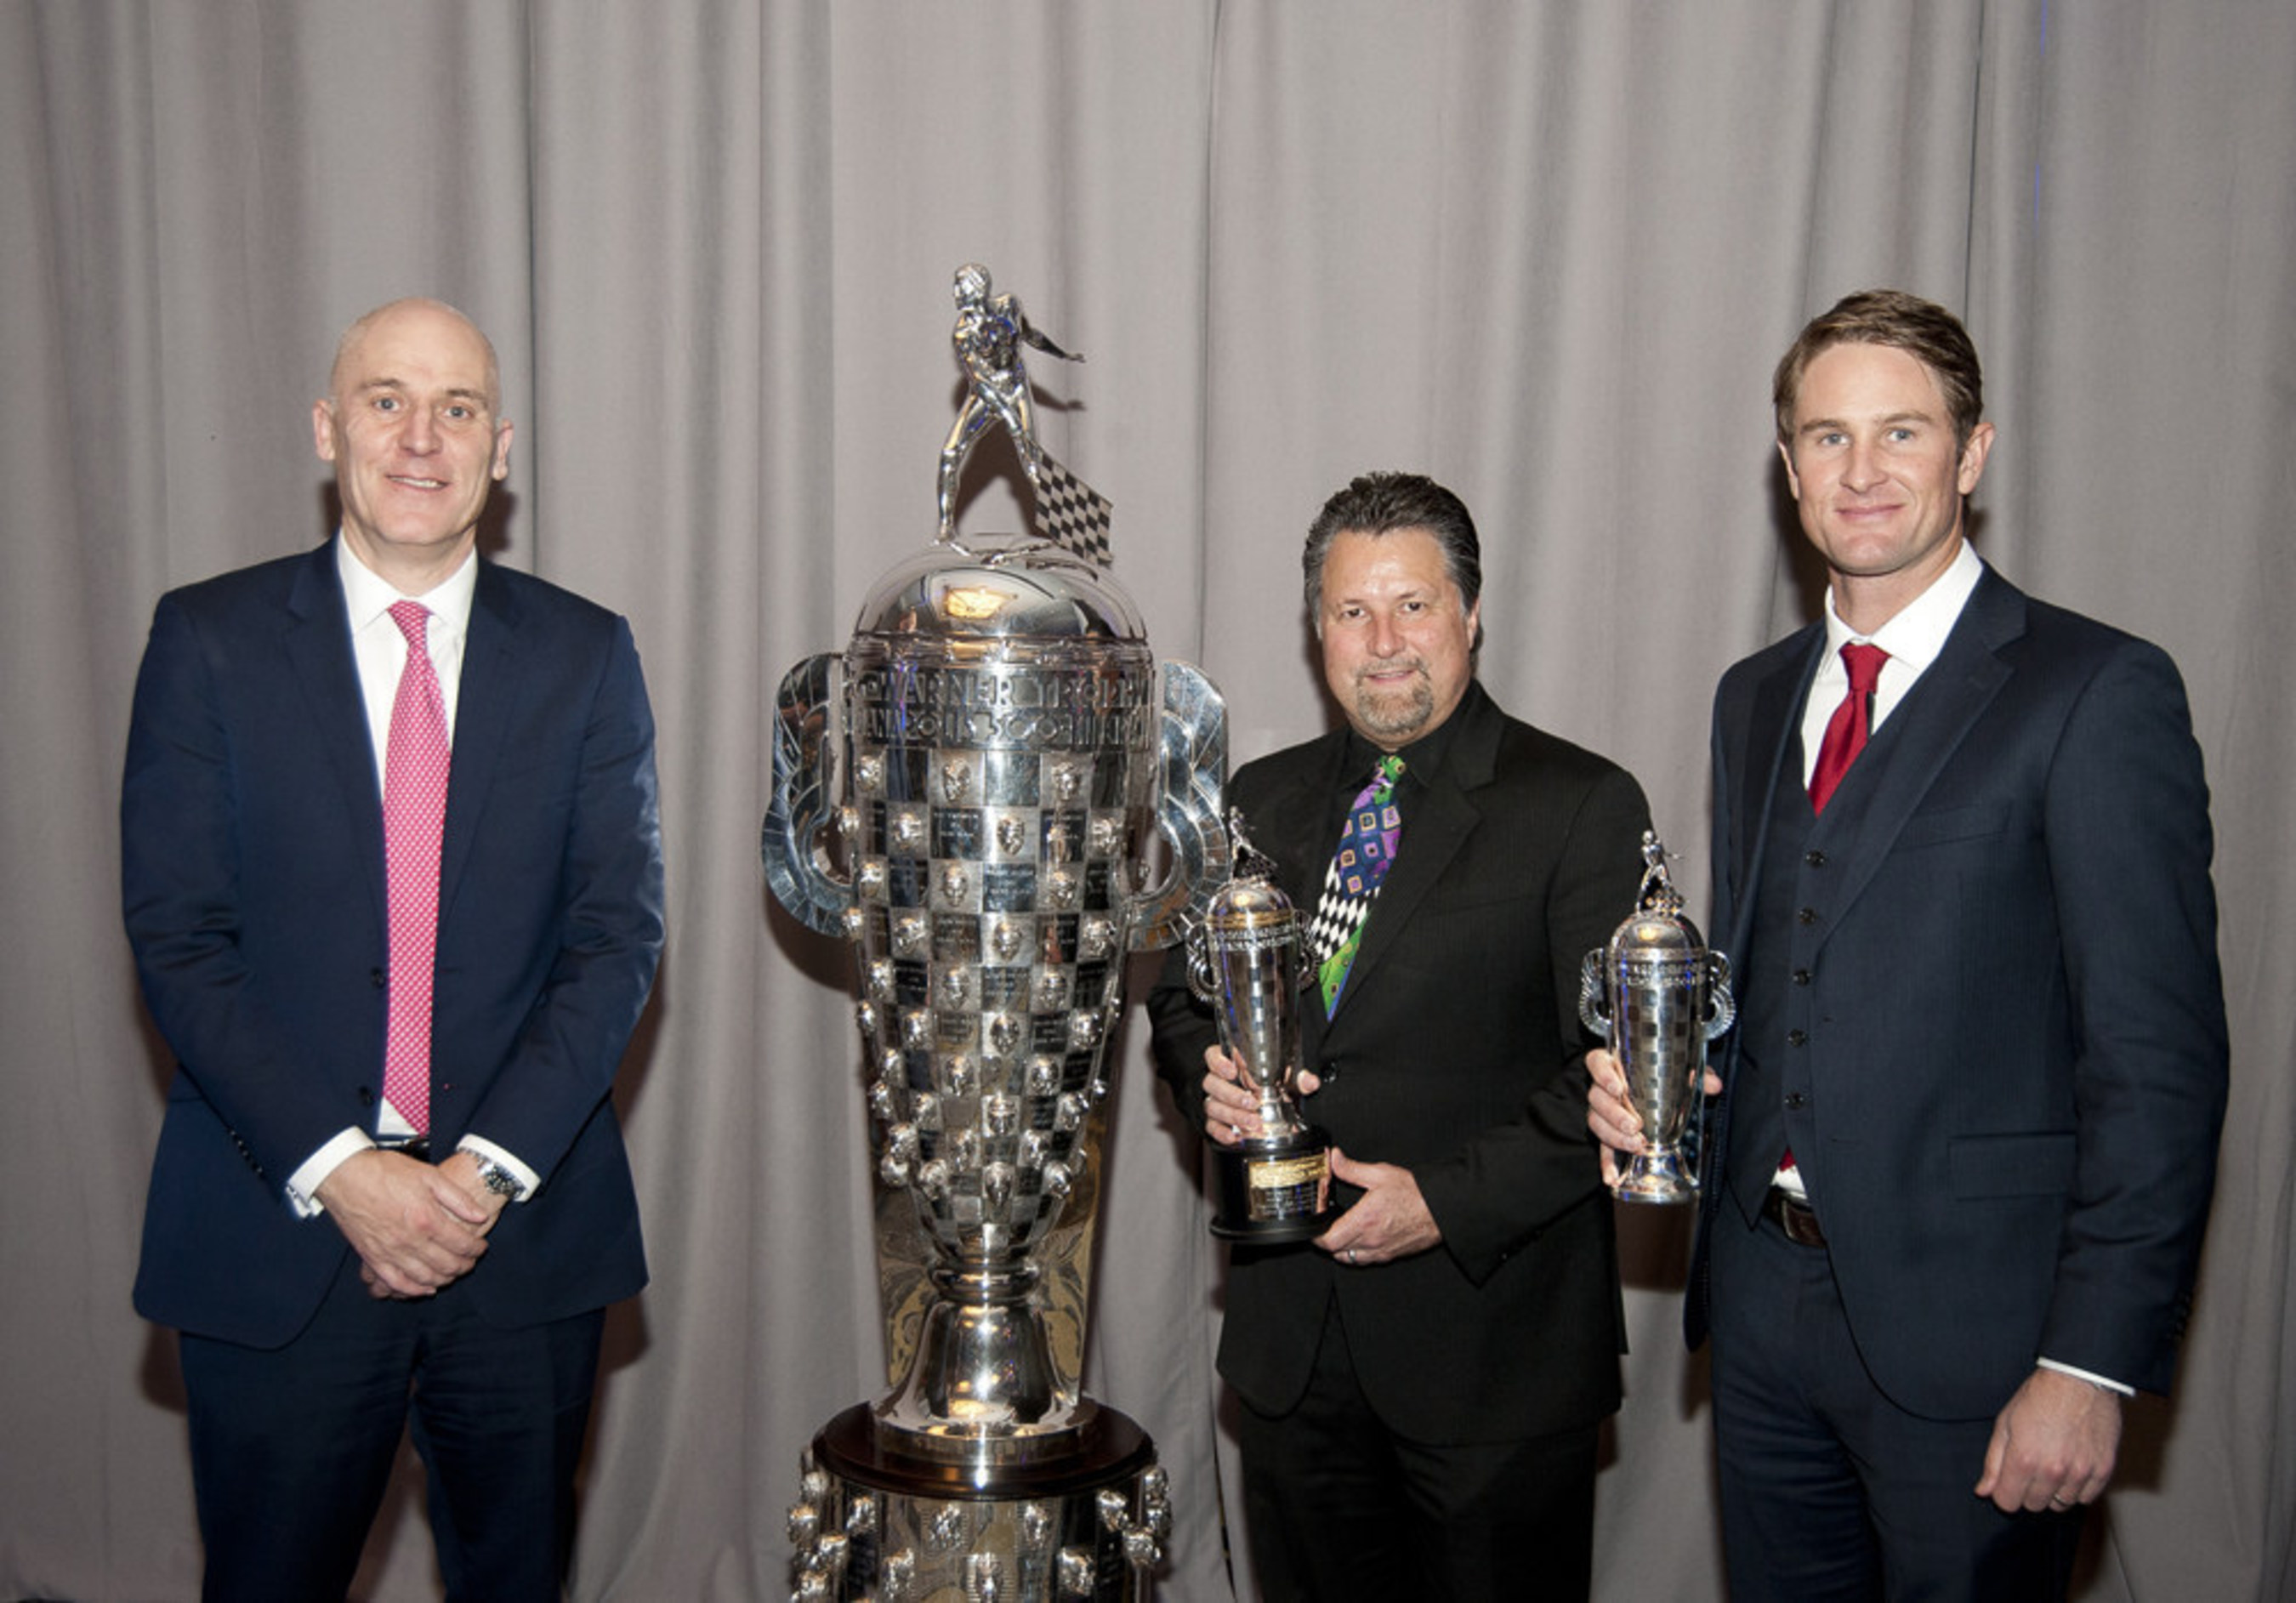 BorgWarner President and Chief Executive Officer James R. Verrier presented 2014 Indianapolis 500 winner Ryan Hunter-Reay with his first BorgWarner Championship Driver's Trophy (TM) during the 2015 Automotive News World Congress. Team owner Michael Andretti also accepted his third BorgWarner Championship Team Owner's Trophy(TM).